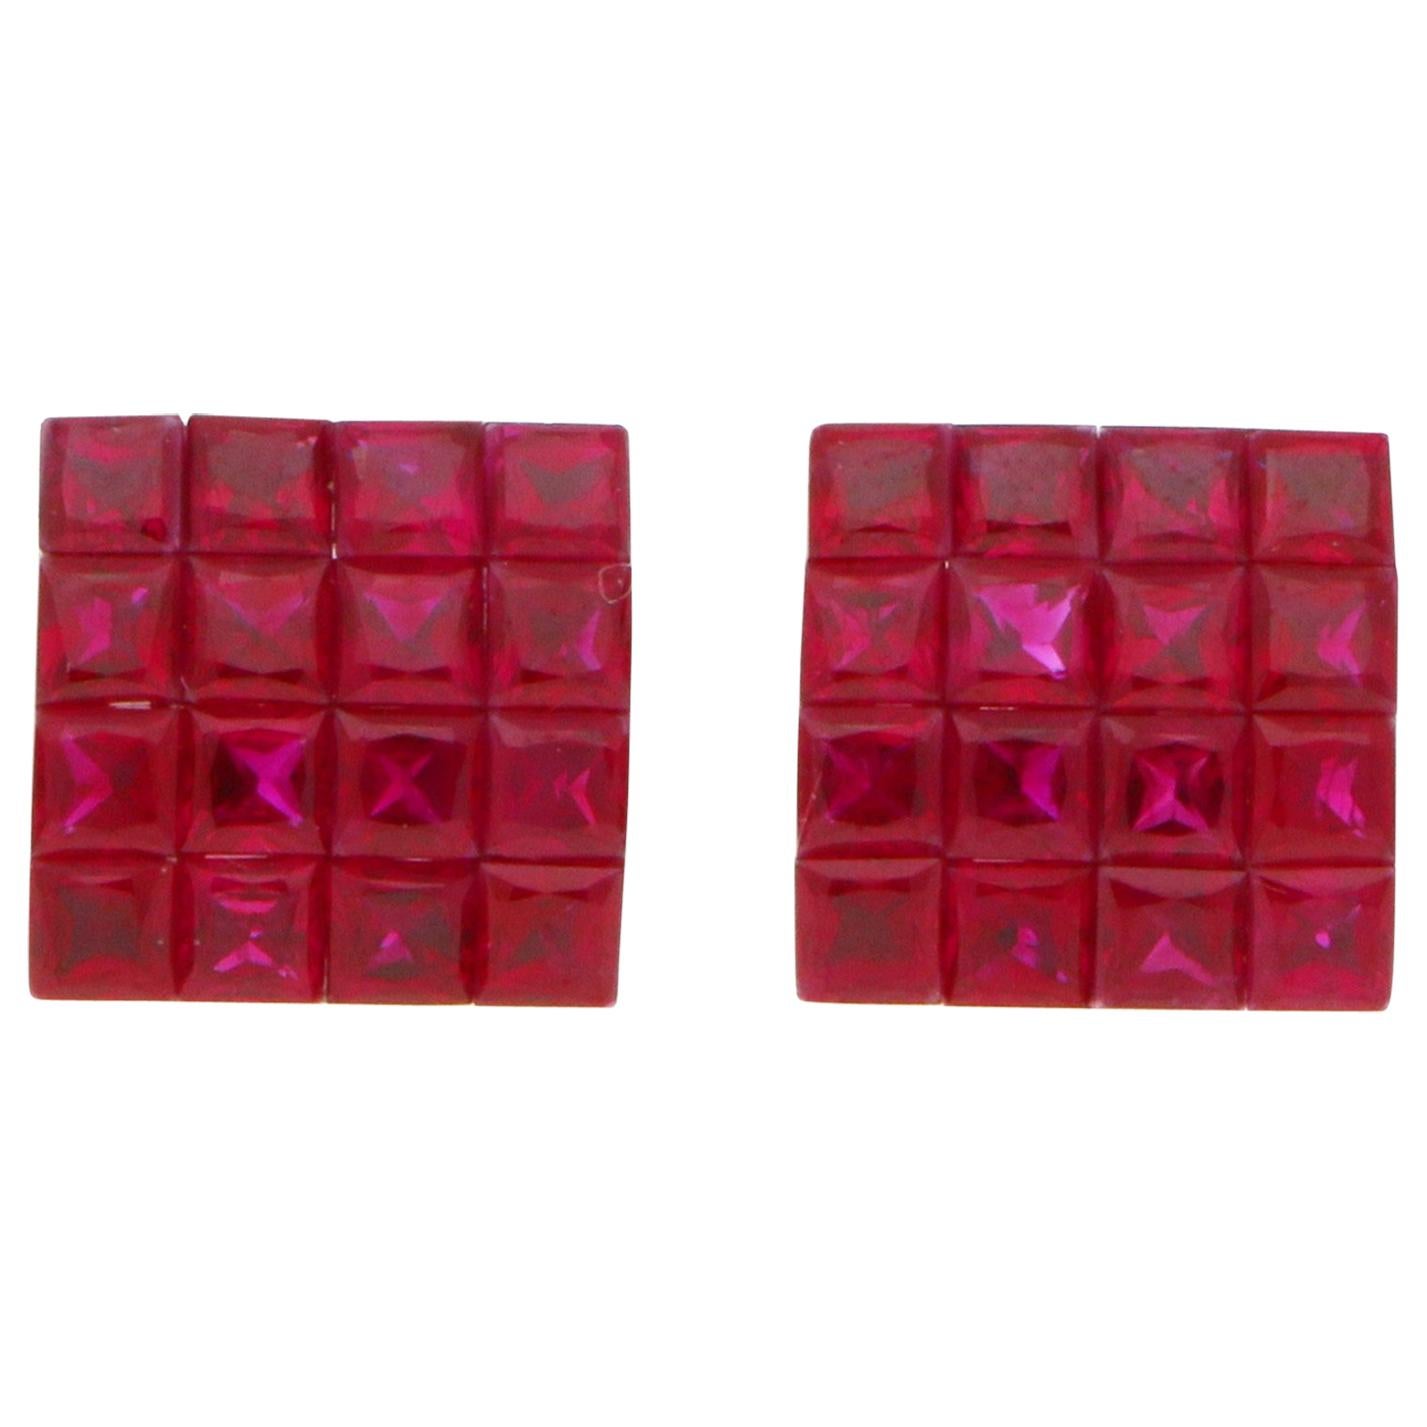 Art Deco Style Invisibly Set Princess Cut Ruby Earrings in 18 Karat White Gold